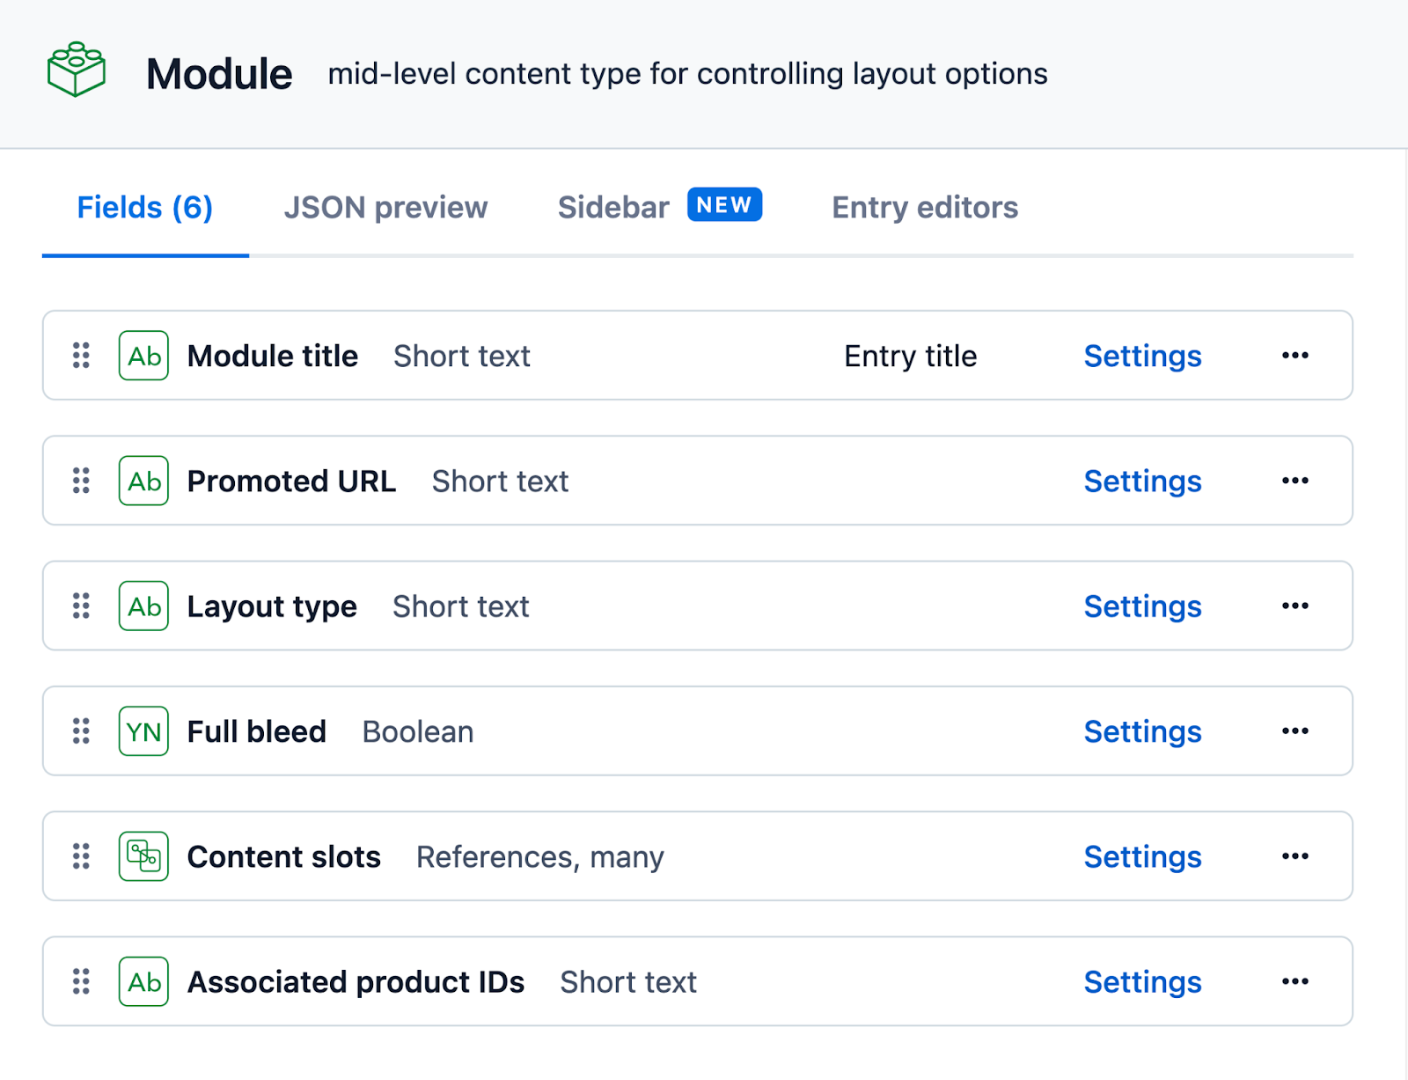 To really give your projects a unified, polished look, you might consider granting editorial access to certain styling controls, such as those outlined in the section above.